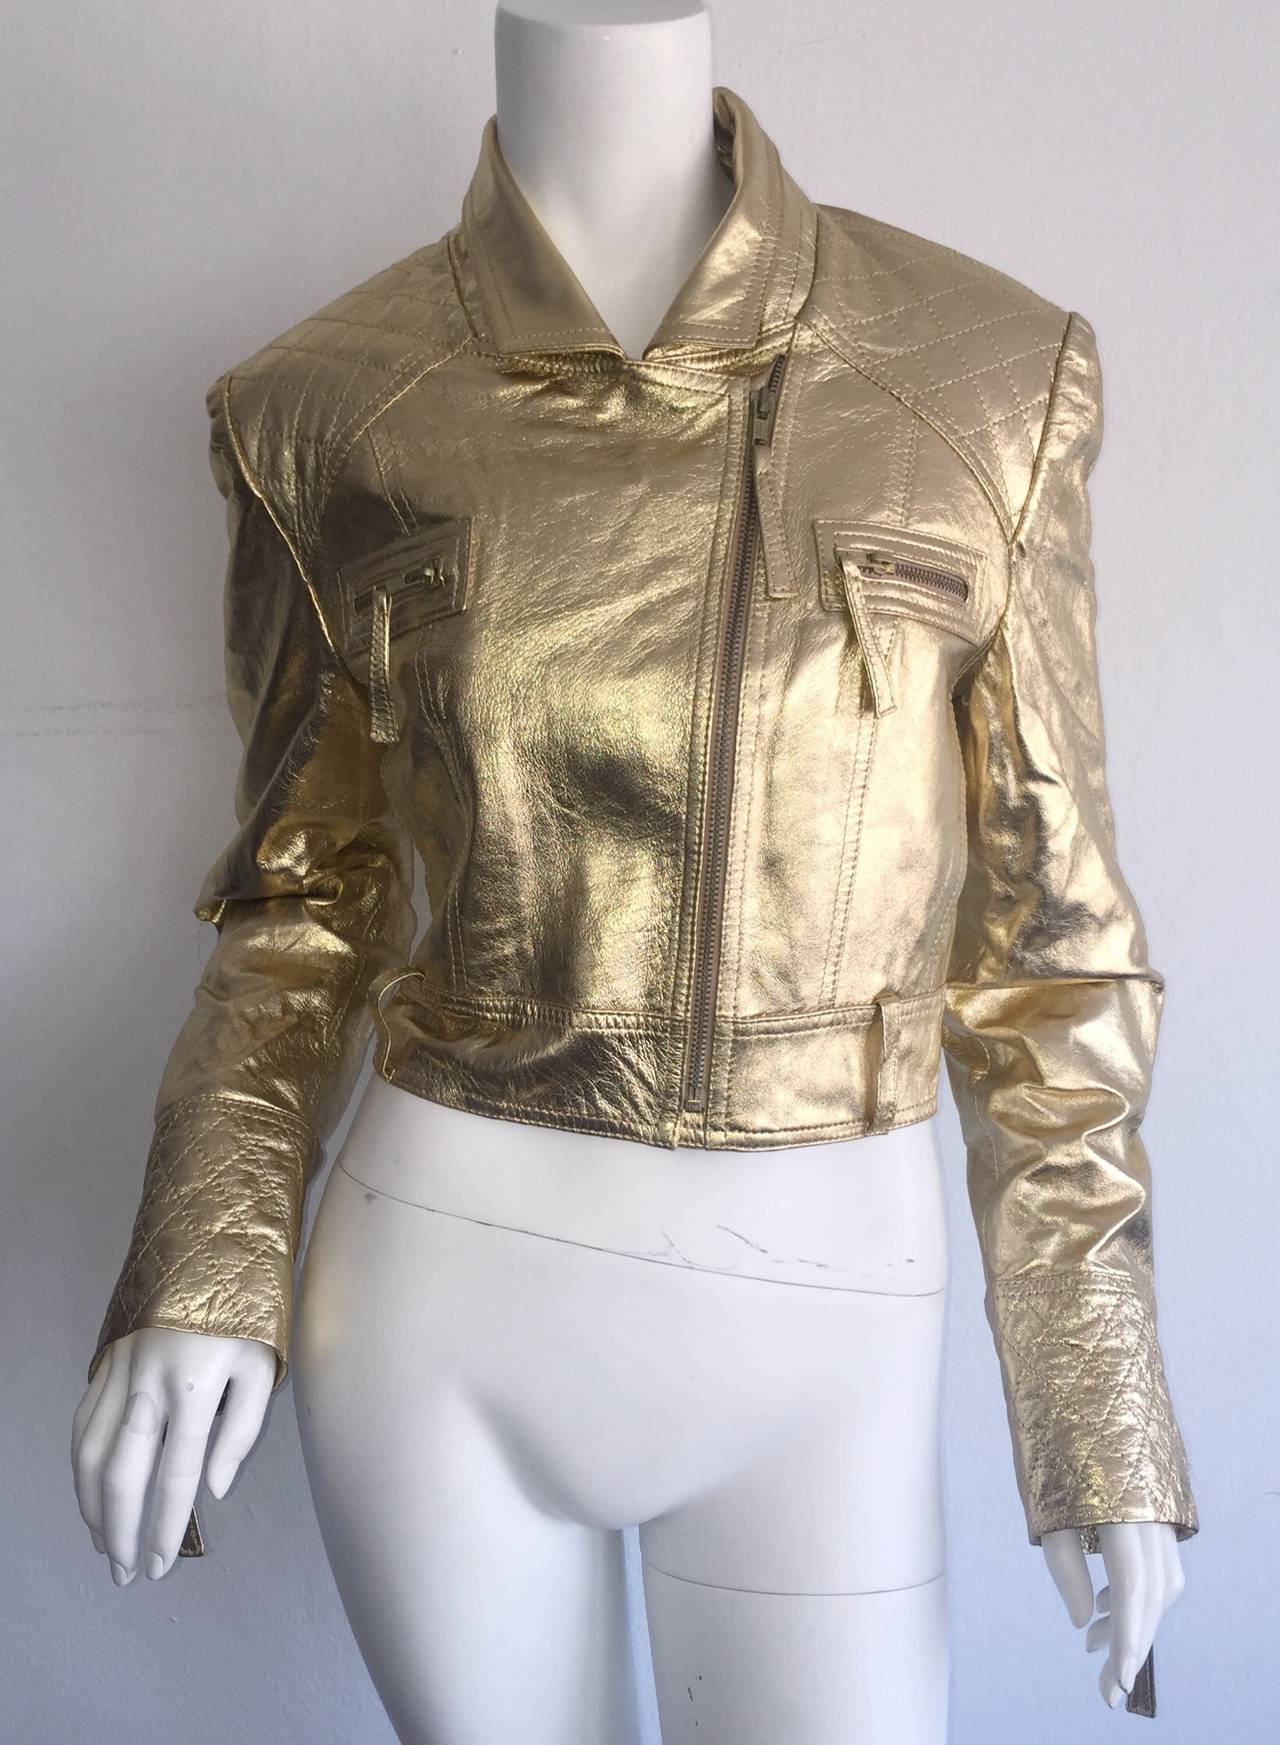 Incredible Victor Dzenk runway jacket! Bright gold leather, with tons of detail! Quilting at shoulders, and at cuffs. Functional zippers on each cuff. Can be worn fully zipped, half zipped, or left open. Looks great with jeans or shorts, or perfect